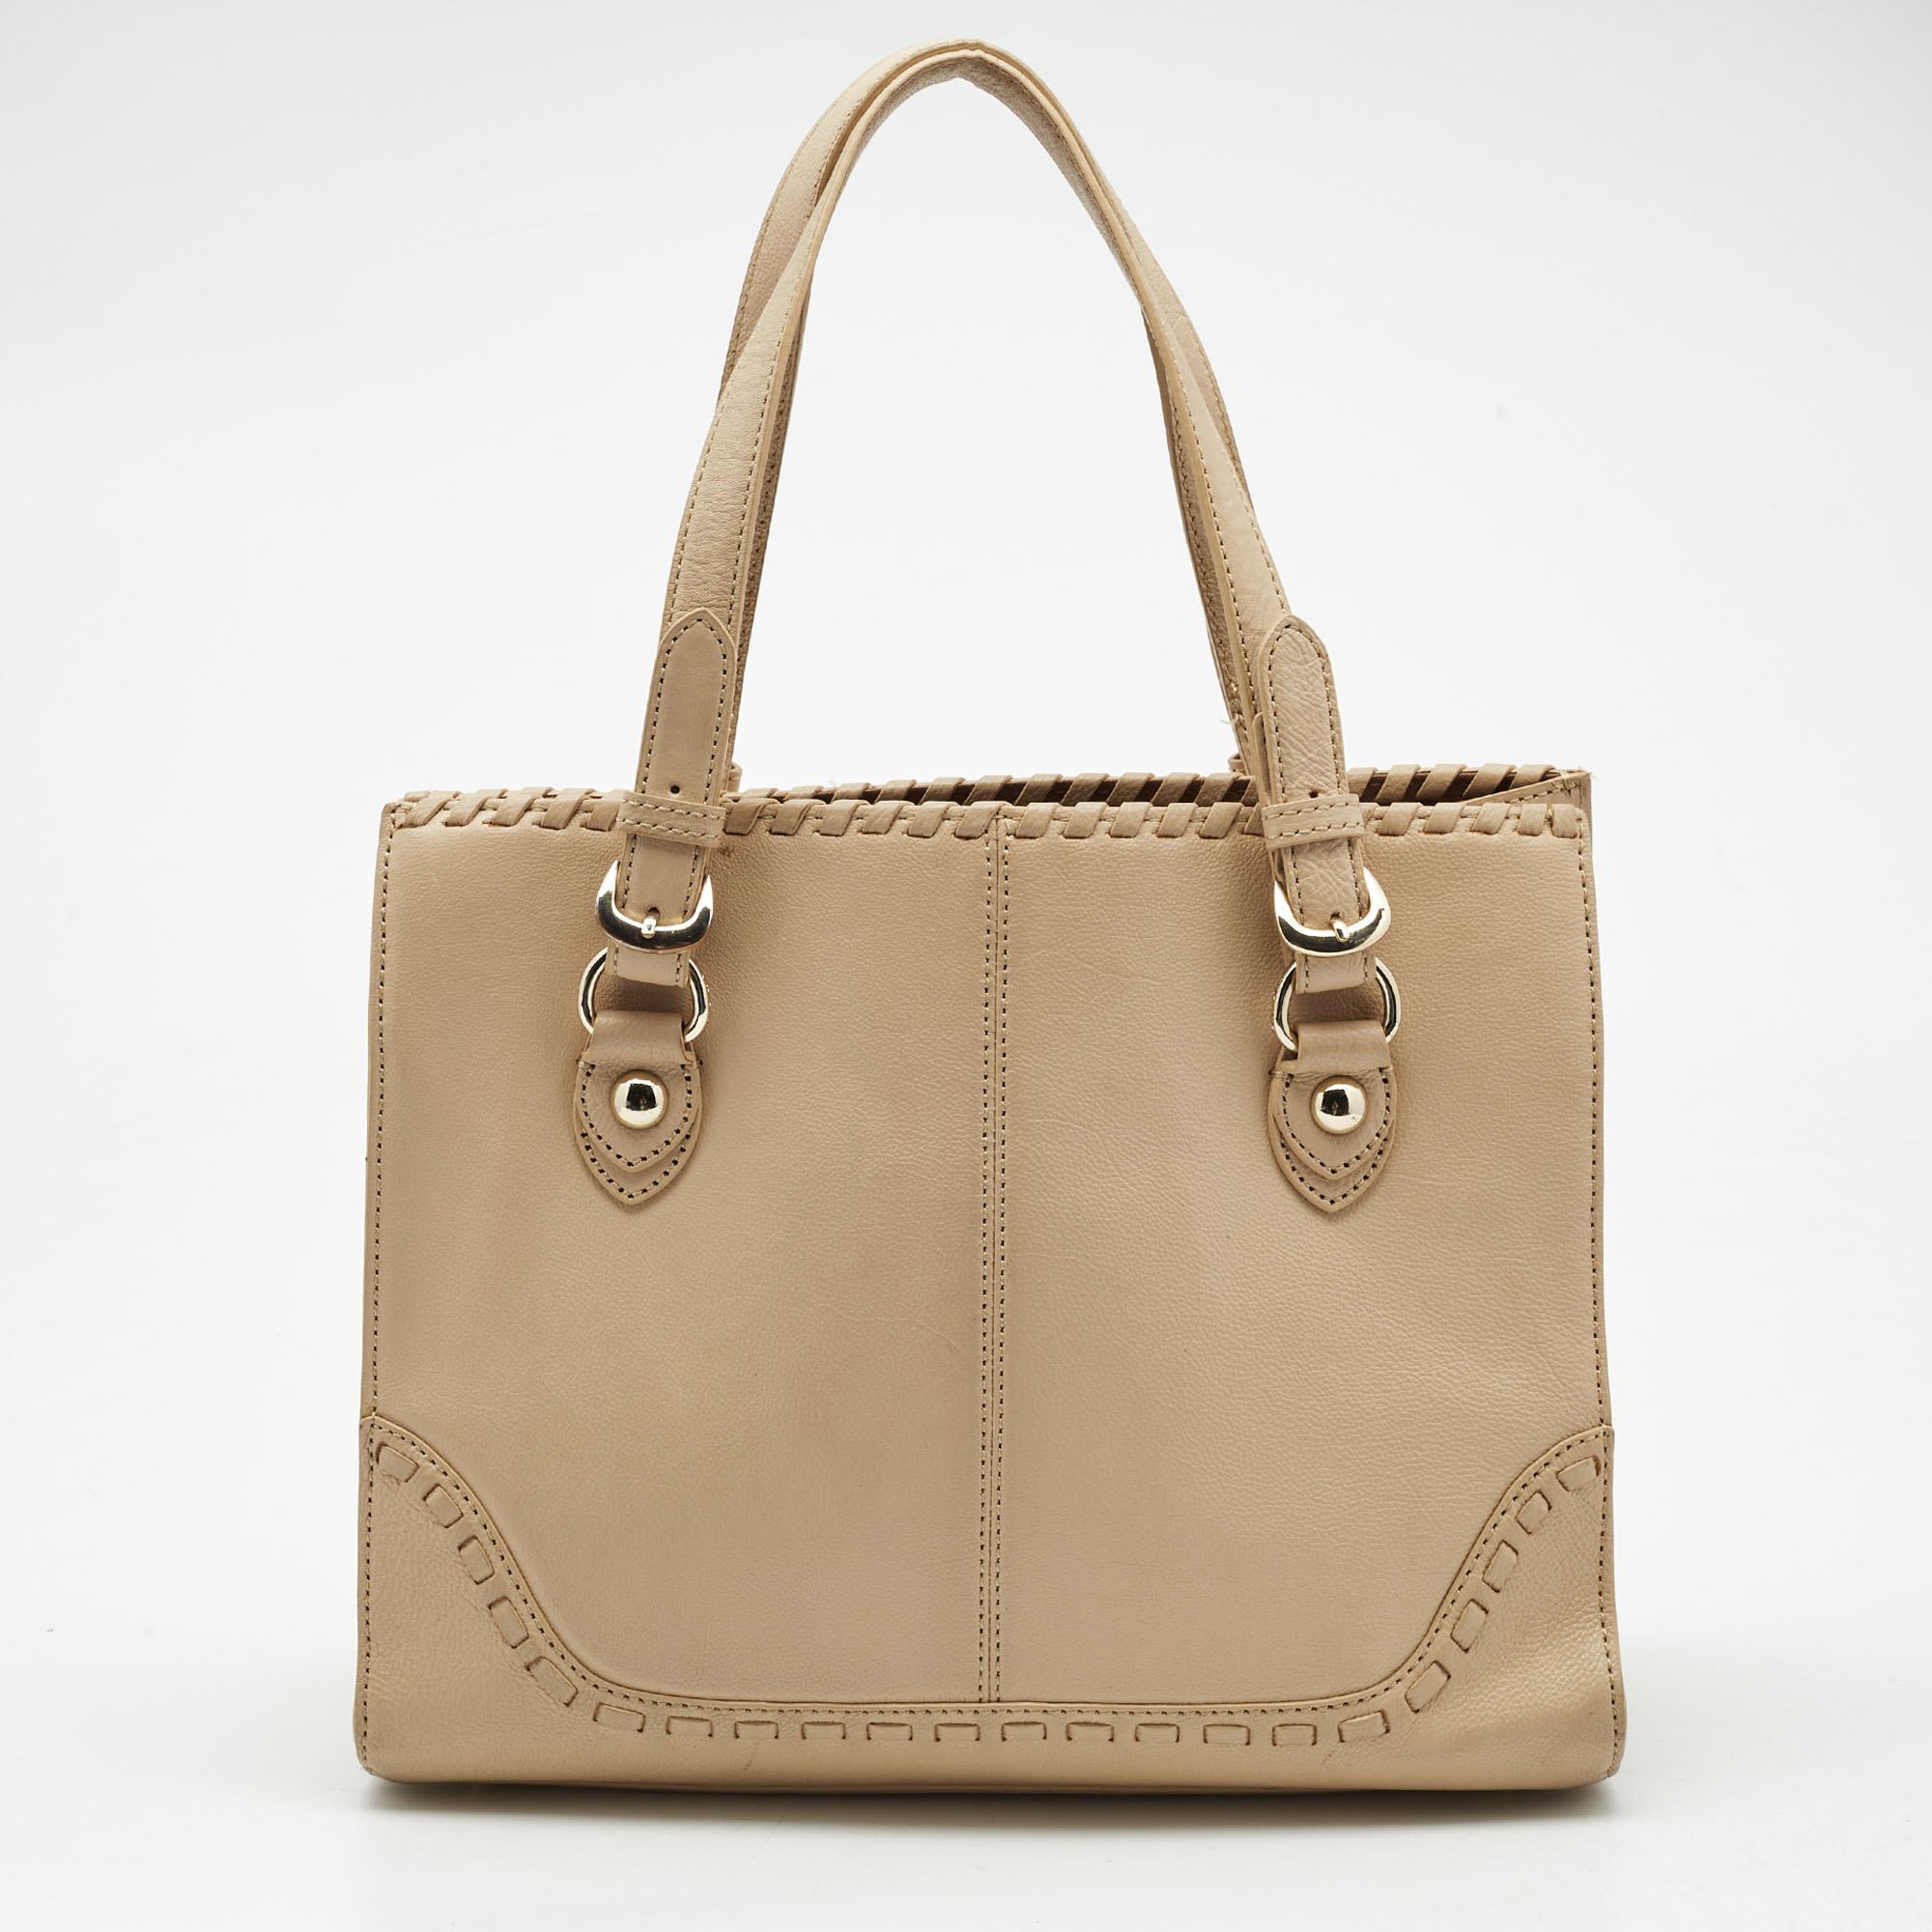 DKNY Beige Leather Beekman French Whipstitch Trim Tote